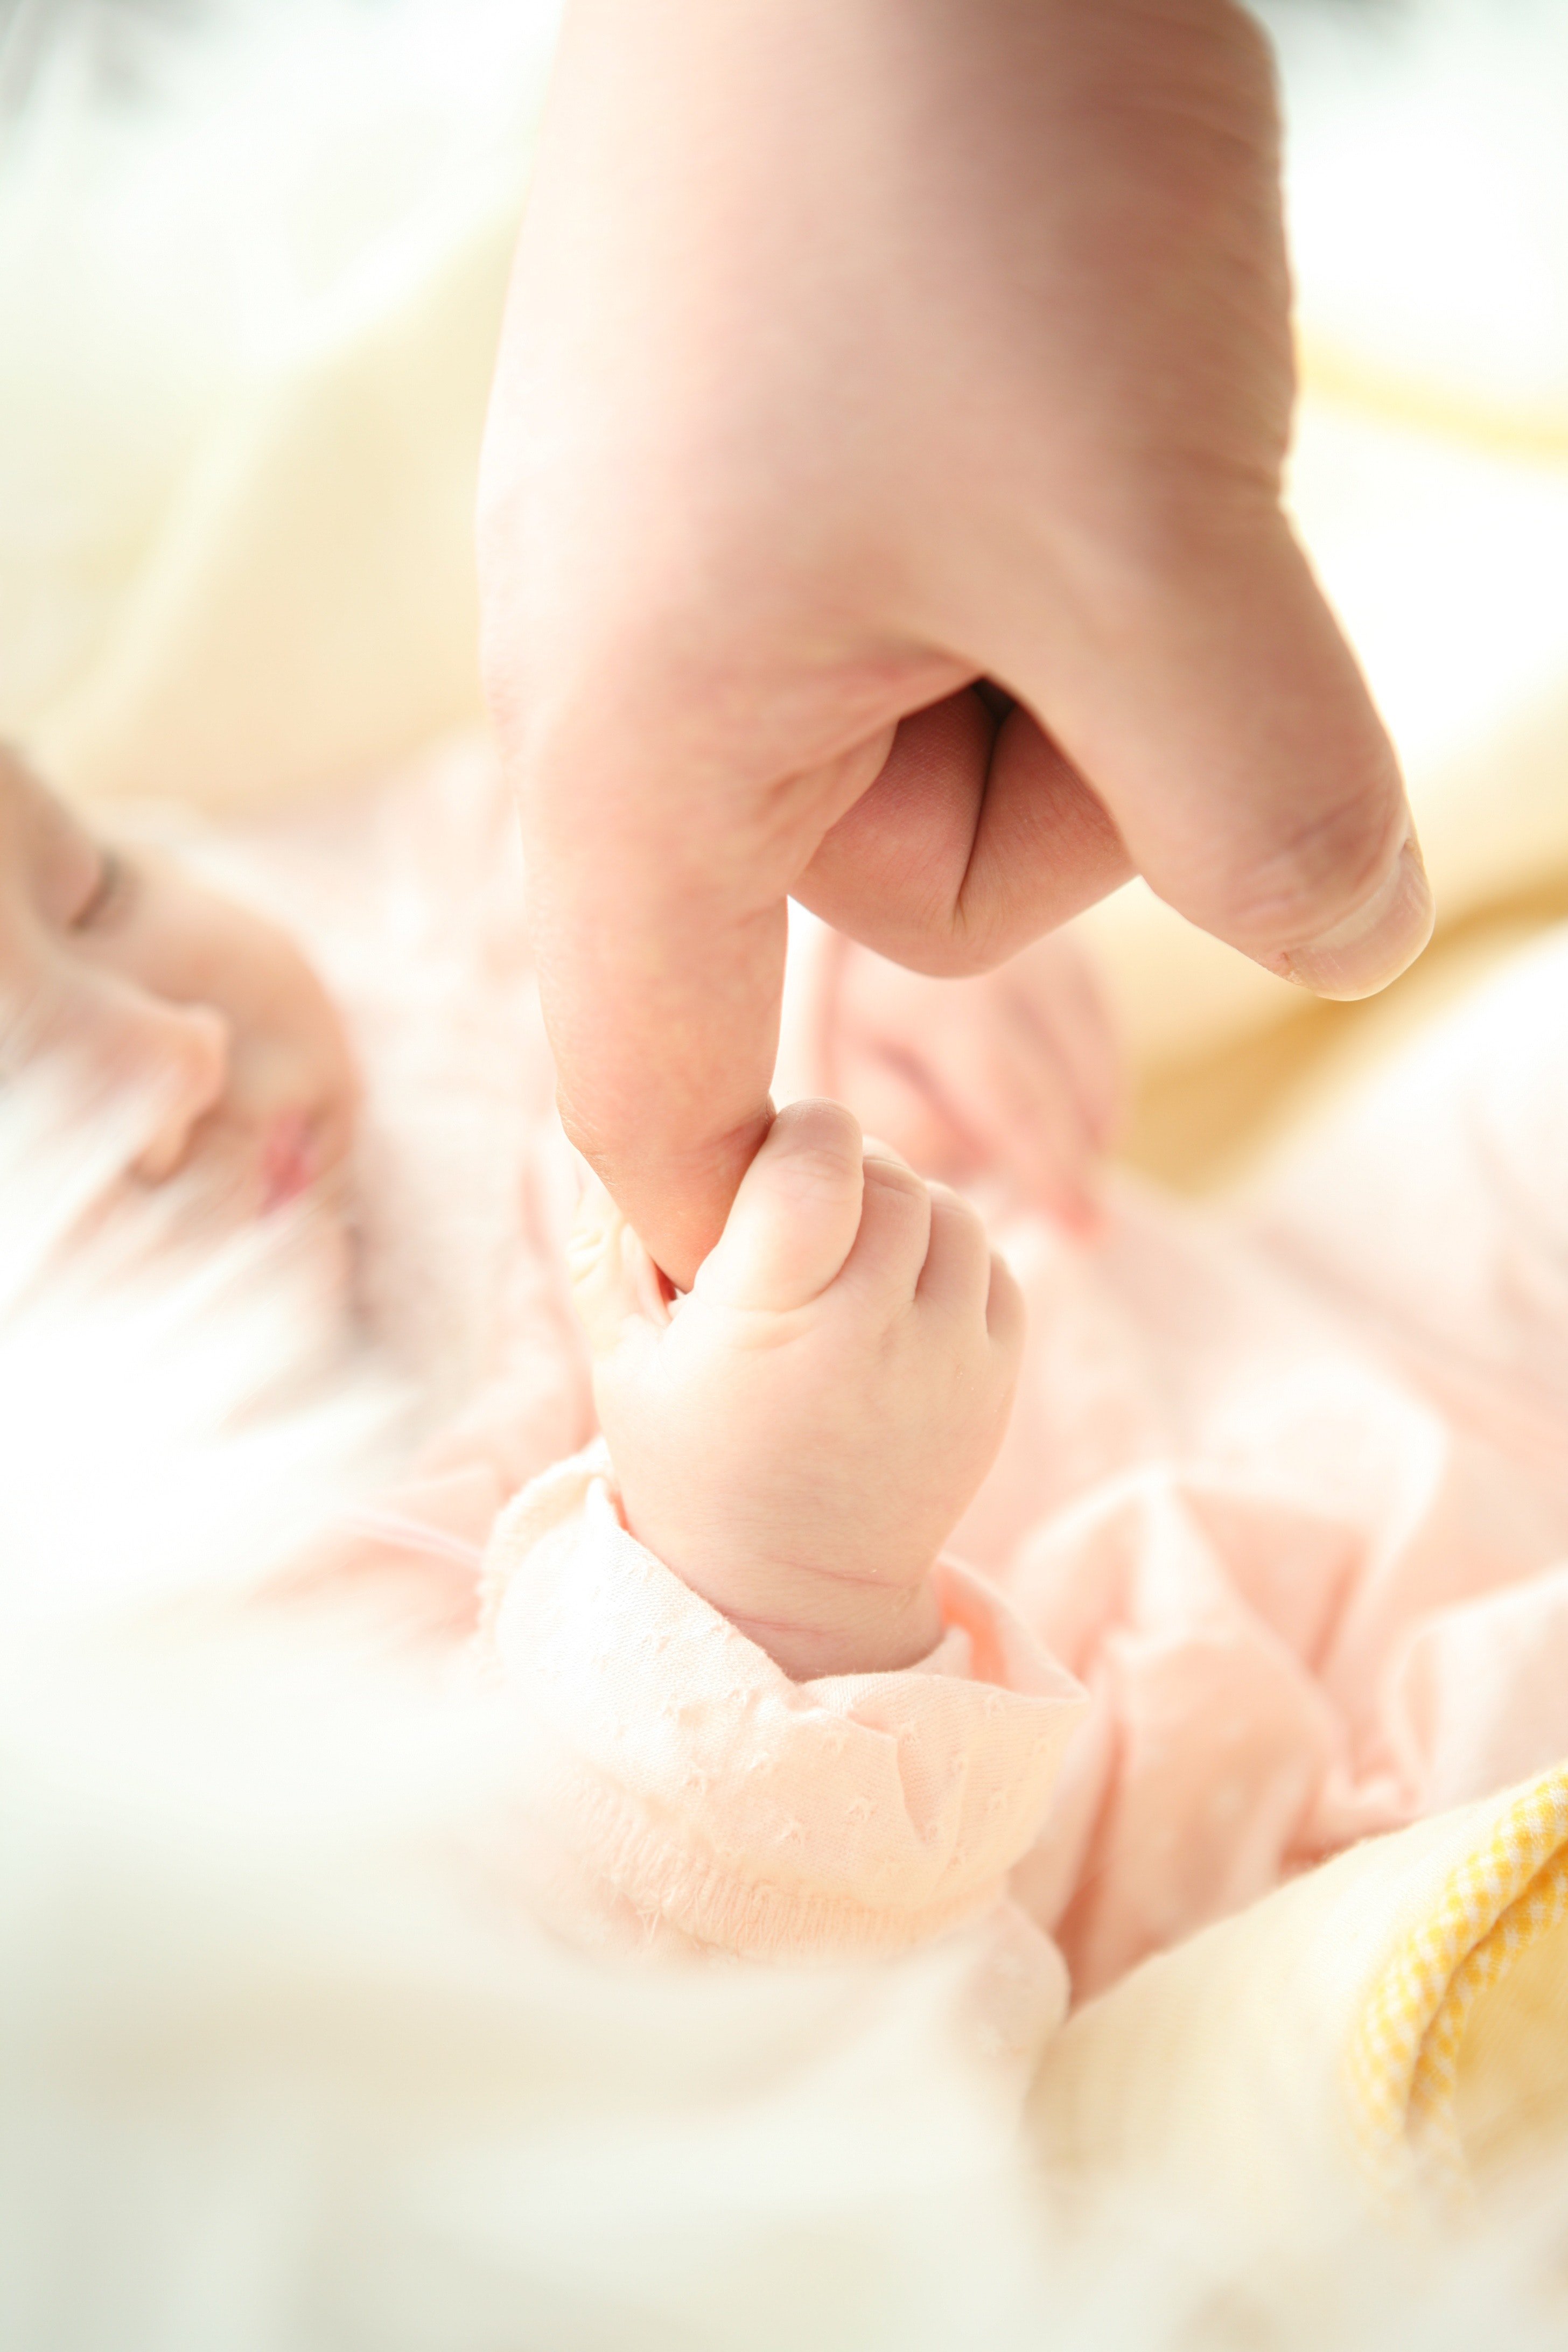 A baby is pictured holding onto someone's finger. | Source: Pexels